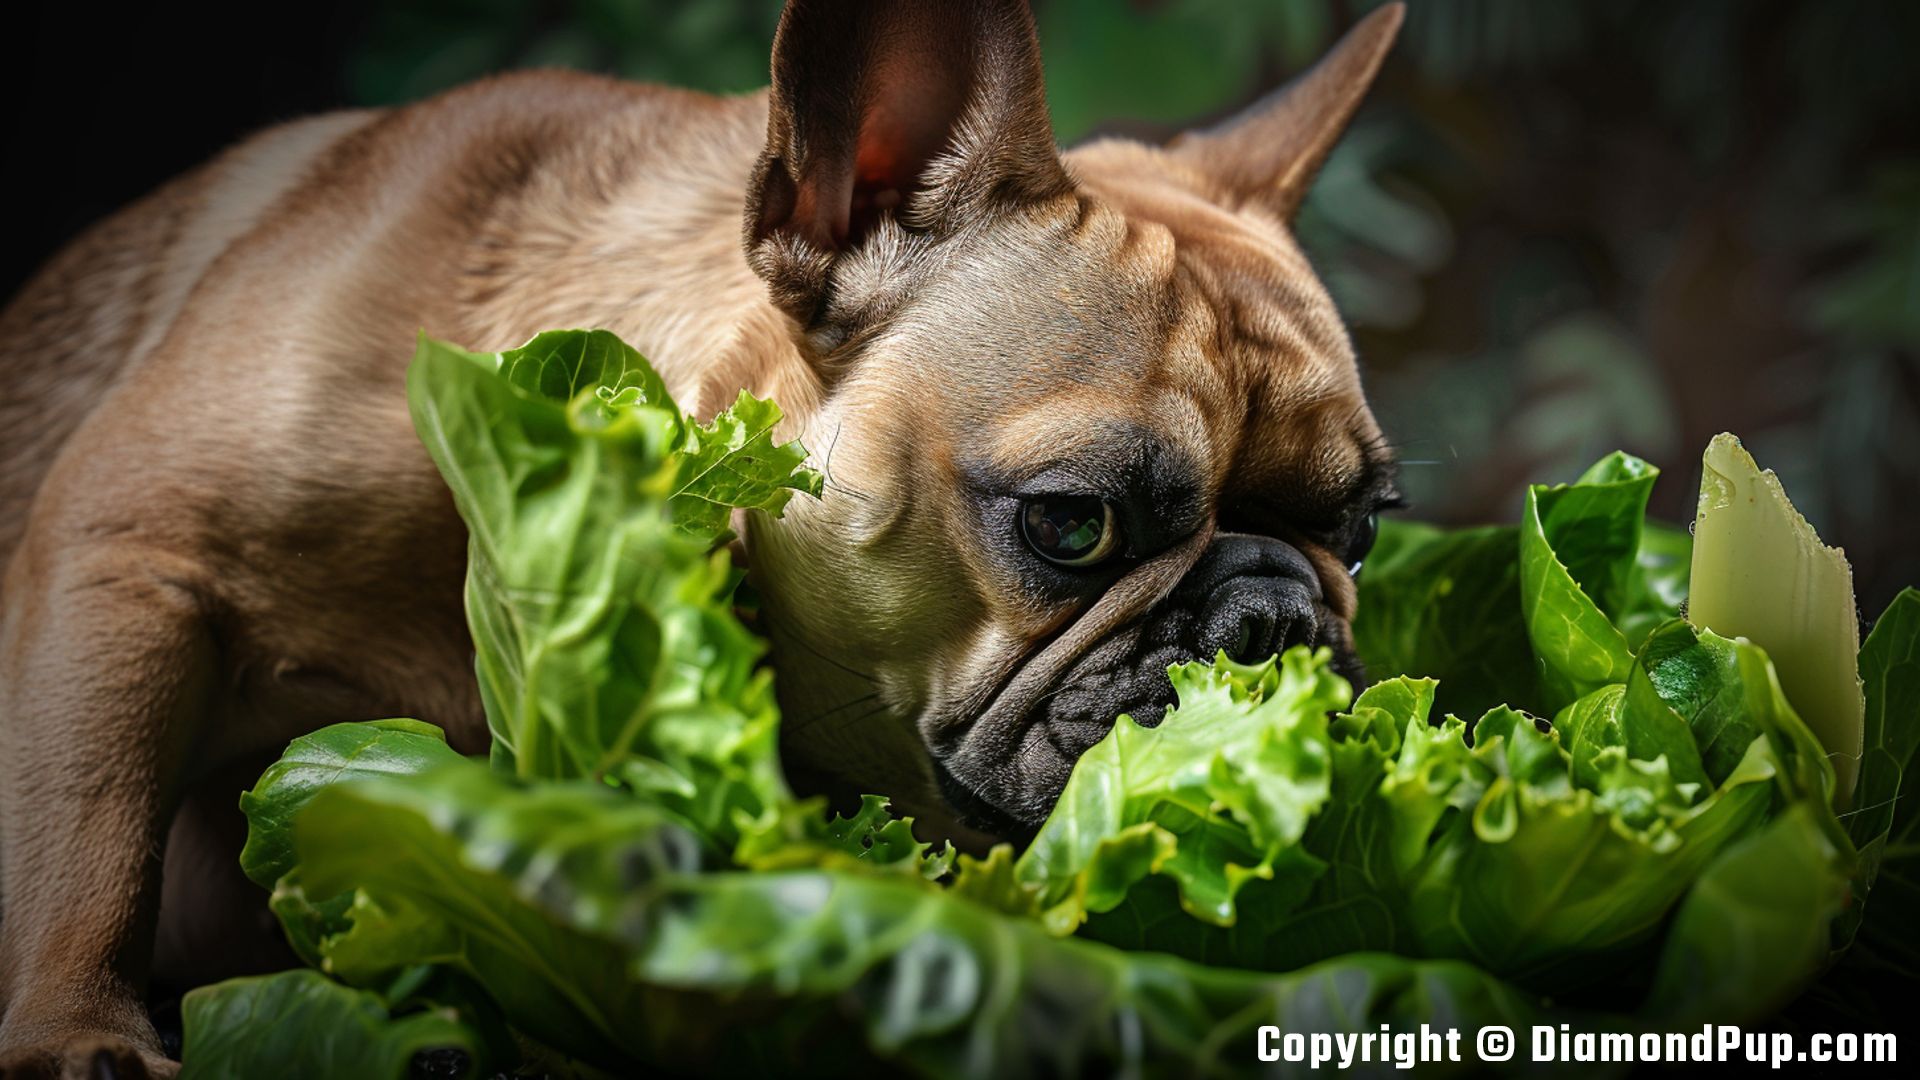 Photograph of a Cute French Bulldog Eating Lettuce